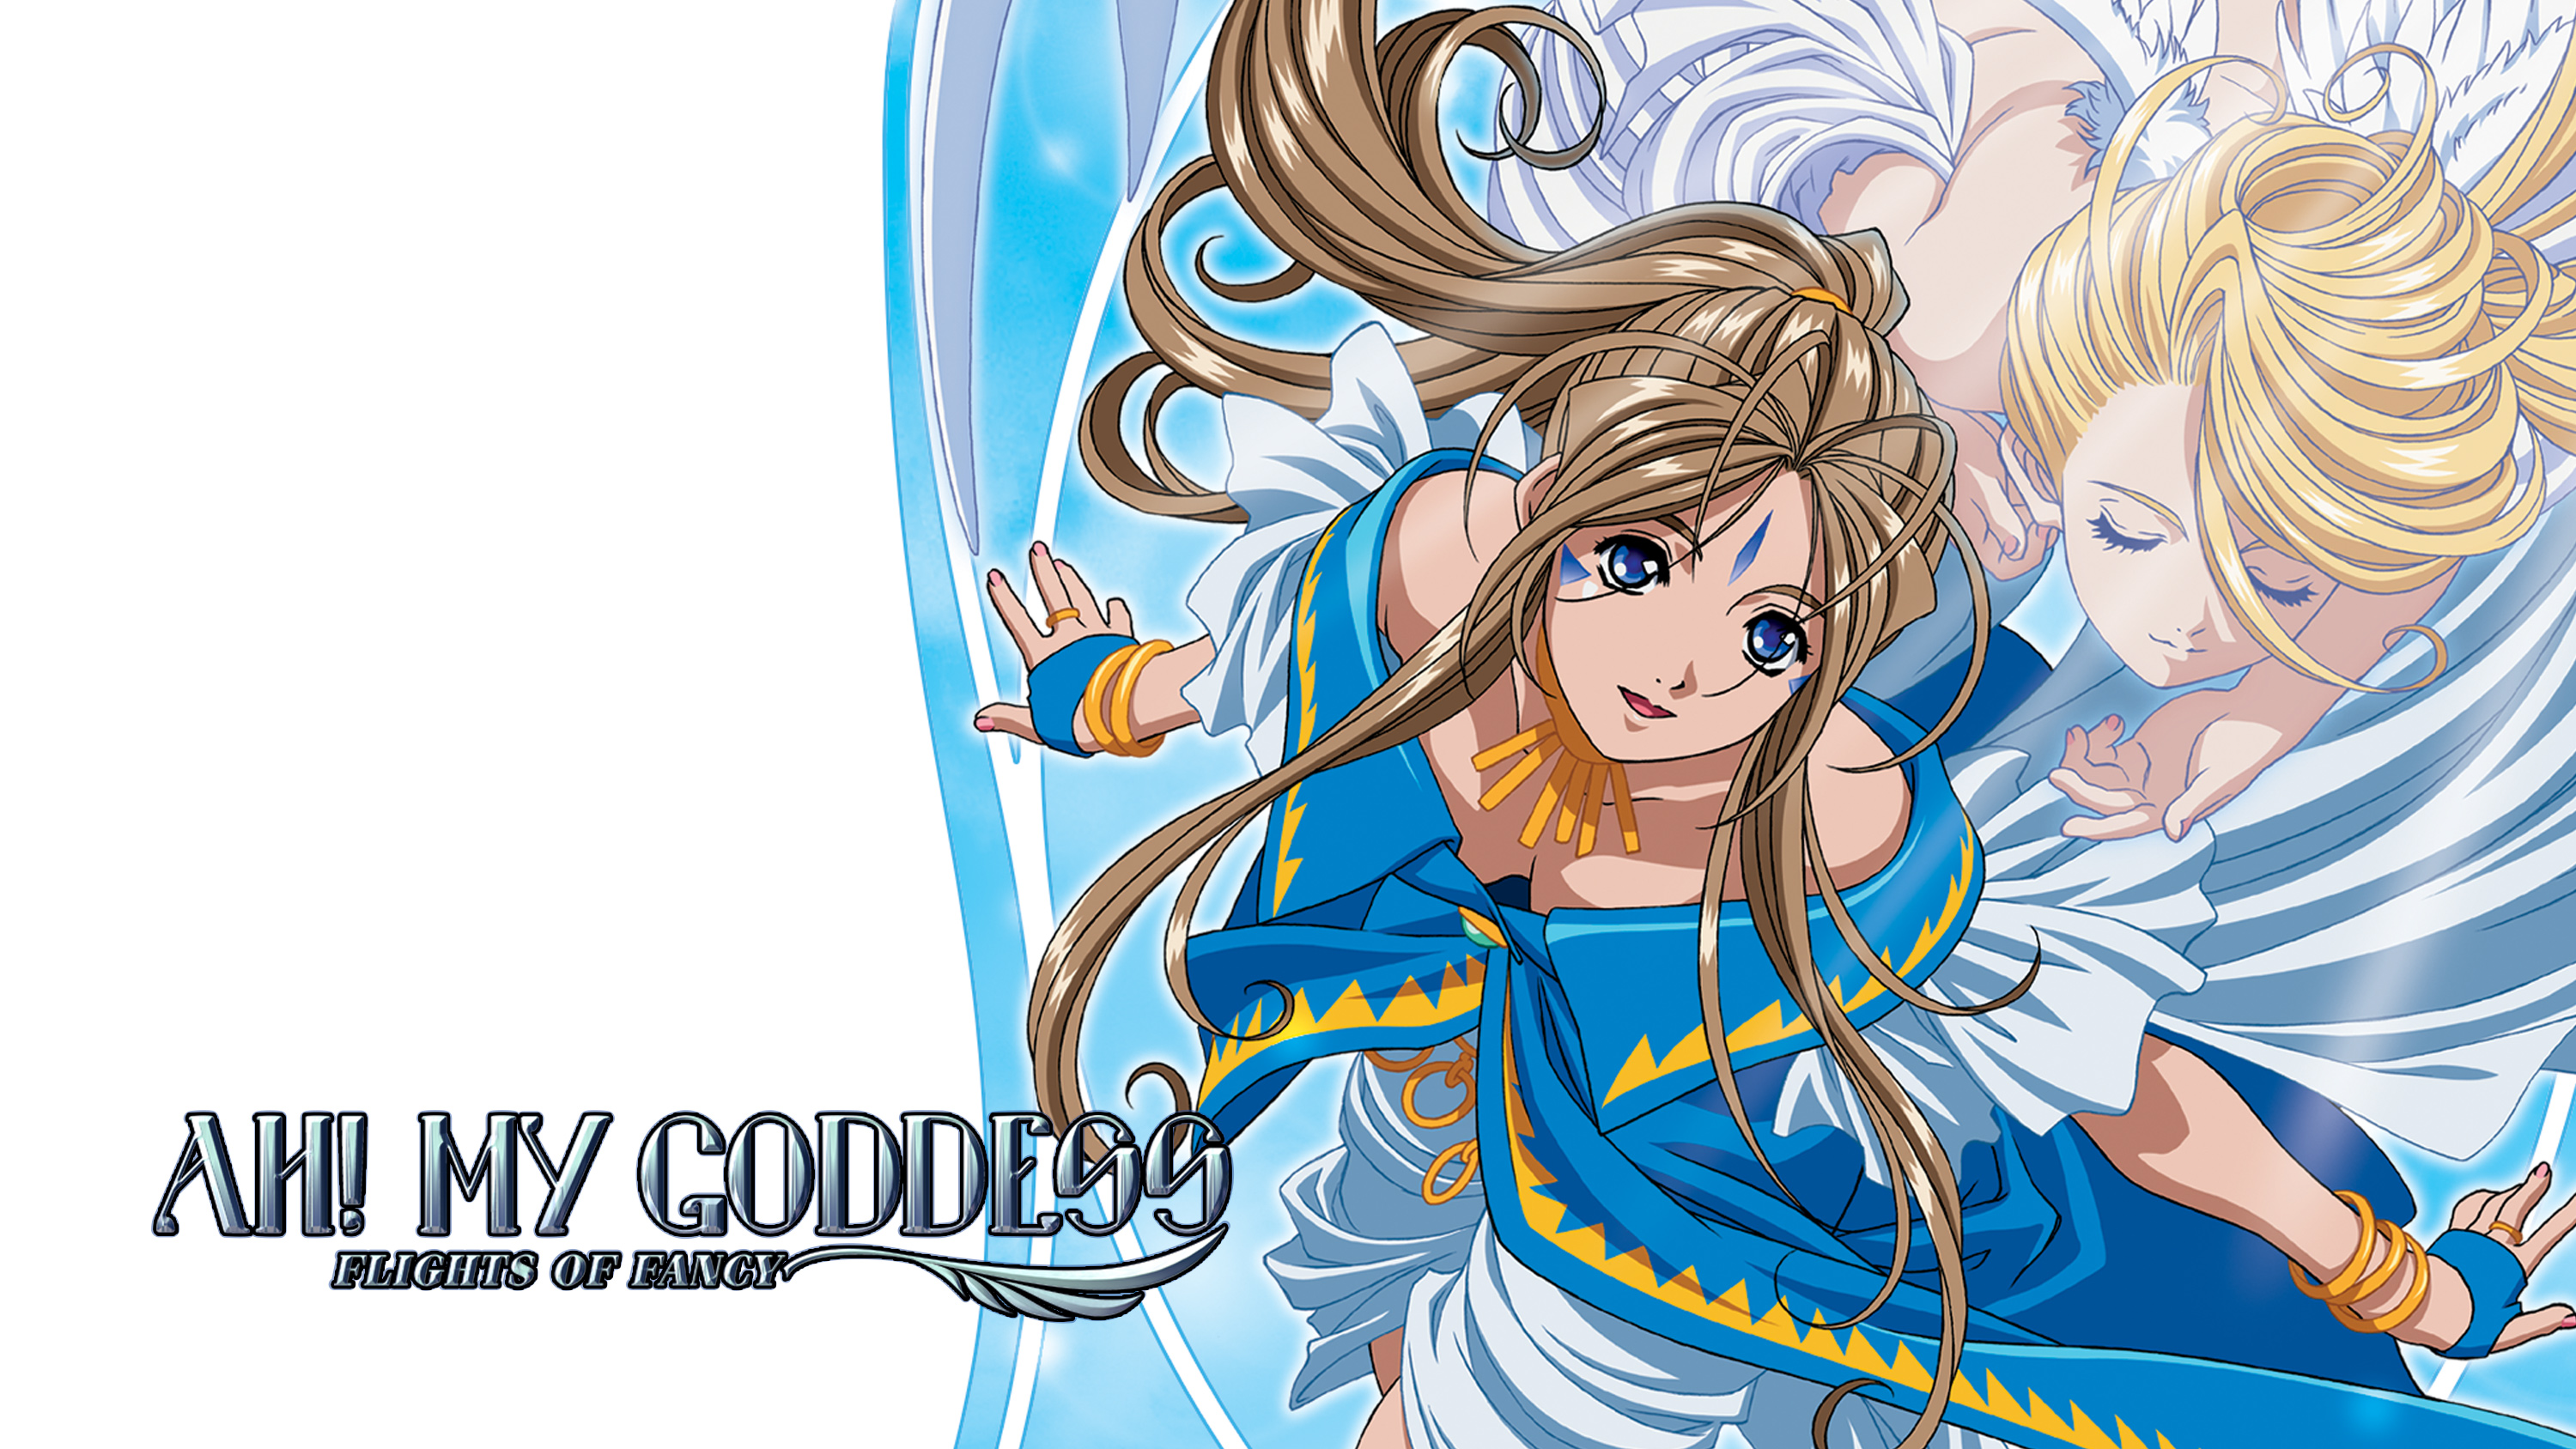 Do u remember anime Oh my Goddess? I've made Belldandy cosplay and I hope  some of you know this character! kawabarker cosplayer : r/cosplayers